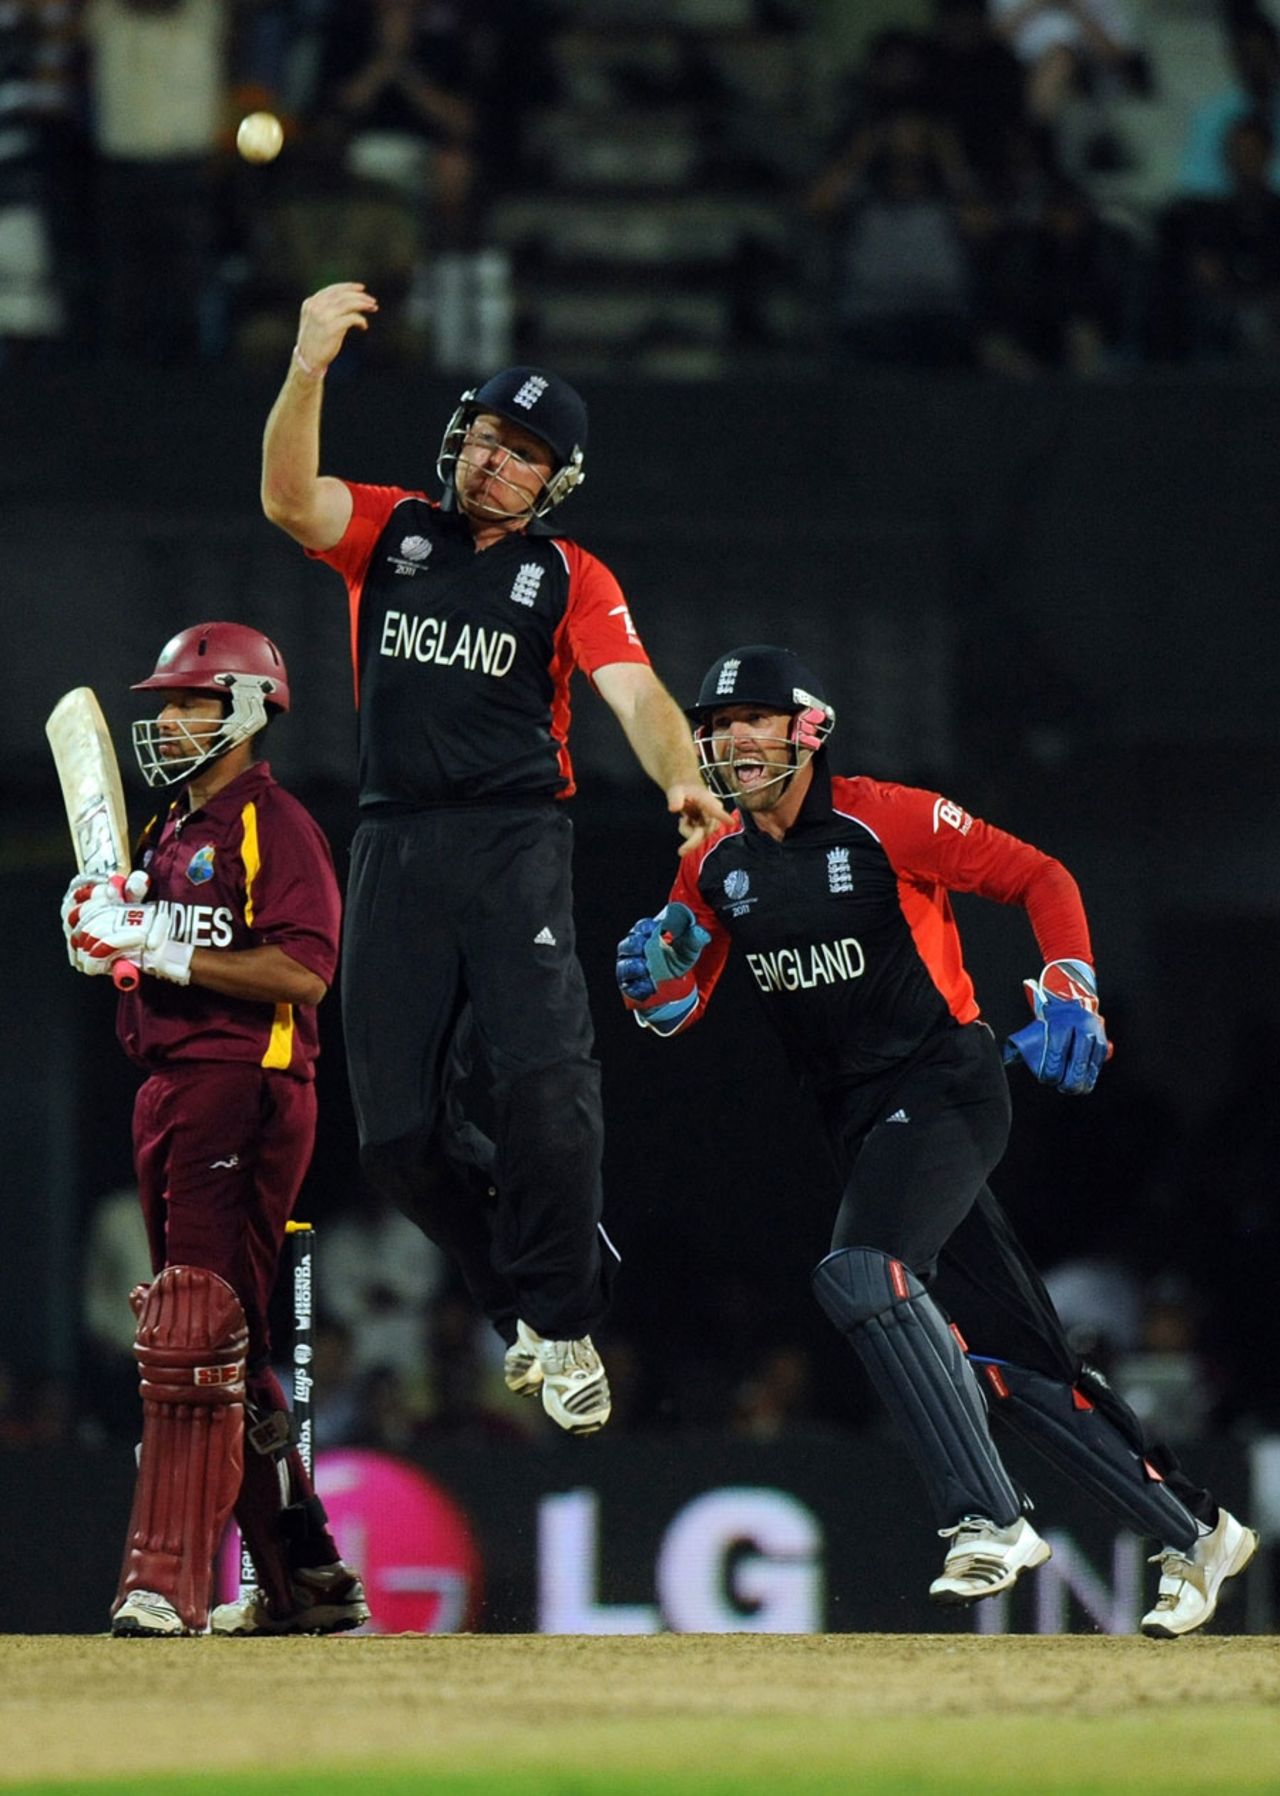 Ramnaresh Sarwan's calm innings ended when he popped a catch to Ian Bell, England v West Indies, World Cup, Group B, March 17, 2011